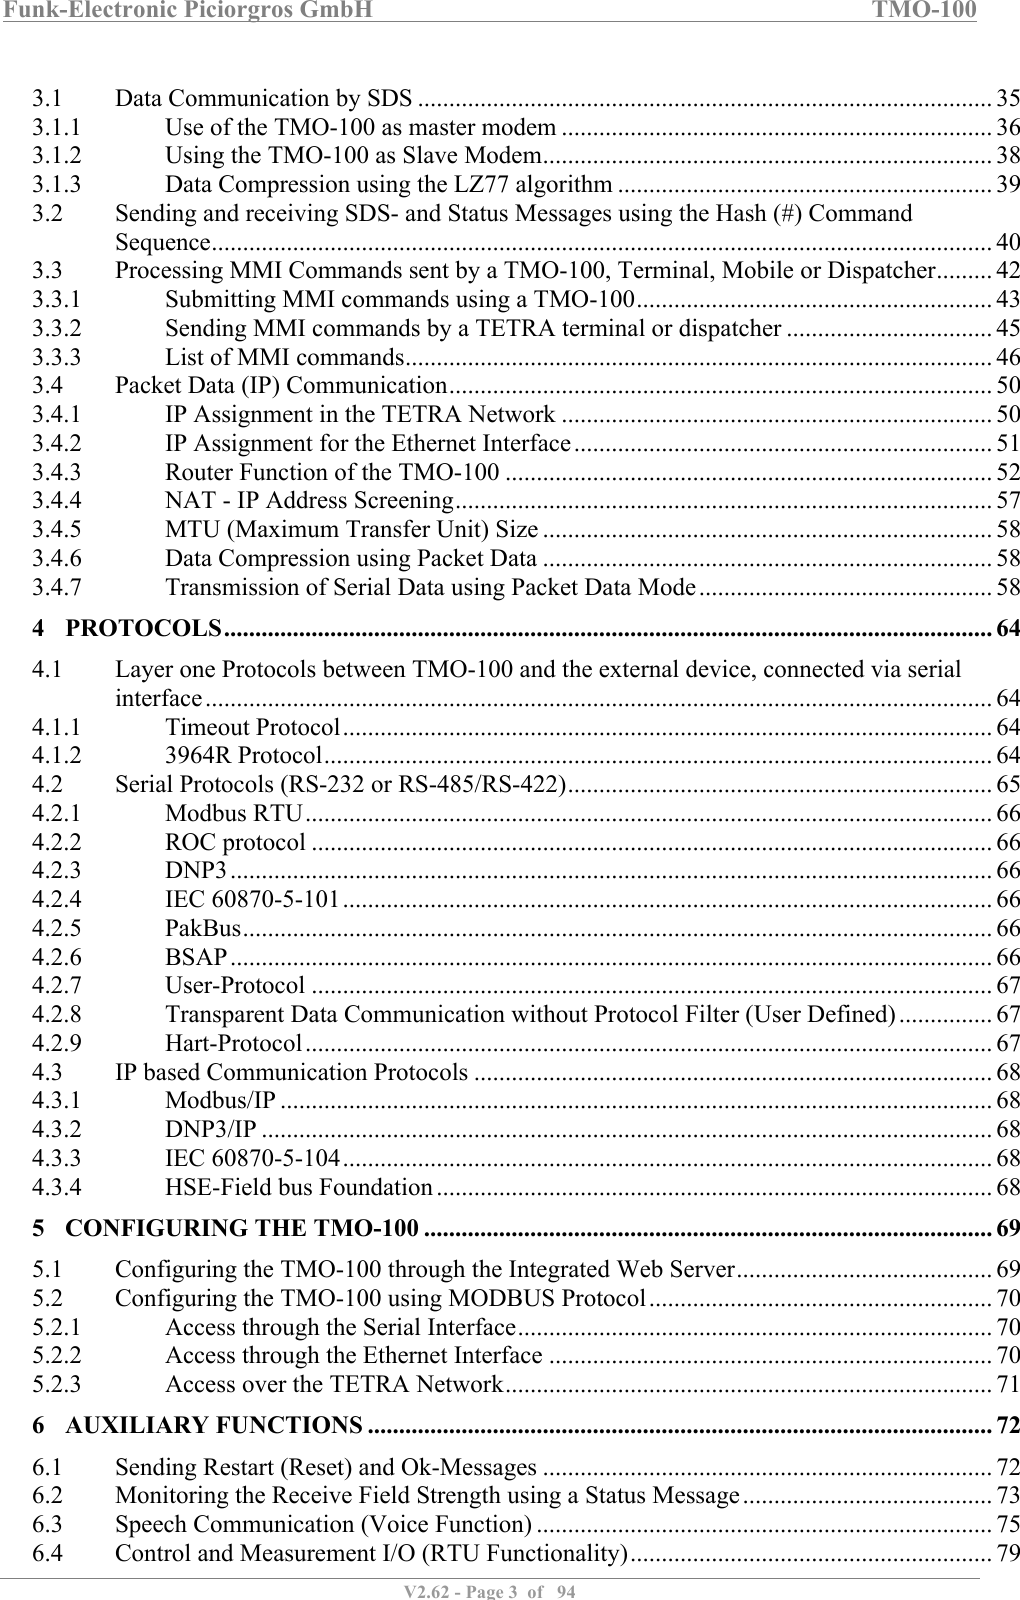 Funk-Electronic Piciorgros GmbH   TMO-100   V2.62 - Page 3  of   94    3.1  Data Communication by SDS ............................................................................................ 35 3.1.1  Use of the TMO-100 as master modem ..................................................................... 36 3.1.2  Using the TMO-100 as Slave Modem ........................................................................ 38 3.1.3  Data Compression using the LZ77 algorithm ............................................................ 39 3.2  Sending and receiving SDS- and Status Messages using the Hash (#) Command Sequence ............................................................................................................................. 40 3.3  Processing MMI Commands sent by a TMO-100, Terminal, Mobile or Dispatcher ......... 42 3.3.1  Submitting MMI commands using a TMO-100 ......................................................... 43 3.3.2  Sending MMI commands by a TETRA terminal or dispatcher ................................. 45 3.3.3  List of MMI commands .............................................................................................. 46 3.4  Packet Data (IP) Communication ....................................................................................... 50 3.4.1  IP Assignment in the TETRA Network ..................................................................... 50 3.4.2  IP Assignment for the Ethernet Interface ................................................................... 51 3.4.3  Router Function of the TMO-100 .............................................................................. 52 3.4.4  NAT - IP Address Screening ...................................................................................... 57 3.4.5  MTU (Maximum Transfer Unit) Size ........................................................................ 58 3.4.6  Data Compression using Packet Data ........................................................................ 58 3.4.7  Transmission of Serial Data using Packet Data Mode ............................................... 58 4 PROTOCOLS ........................................................................................................................... 64 4.1  Layer one Protocols between TMO-100 and the external device, connected via serial interface .............................................................................................................................. 64 4.1.1  Timeout Protocol ........................................................................................................ 64 4.1.2  3964R Protocol ........................................................................................................... 64 4.2  Serial Protocols (RS-232 or RS-485/RS-422) .................................................................... 65 4.2.1  Modbus RTU .............................................................................................................. 66 4.2.2  ROC protocol ............................................................................................................. 66 4.2.3  DNP3 .......................................................................................................................... 66 4.2.4  IEC 60870-5-101 ........................................................................................................ 66 4.2.5  PakBus ........................................................................................................................ 66 4.2.6  BSAP .......................................................................................................................... 66 4.2.7  User-Protocol ............................................................................................................. 67 4.2.8  Transparent Data Communication without Protocol Filter (User Defined) ............... 67 4.2.9  Hart-Protocol .............................................................................................................. 67 4.3  IP based Communication Protocols ................................................................................... 68 4.3.1  Modbus/IP .................................................................................................................. 68 4.3.2  DNP3/IP ..................................................................................................................... 68 4.3.3  IEC 60870-5-104 ........................................................................................................ 68 4.3.4  HSE-Field bus Foundation ......................................................................................... 68 5 CONFIGURING THE TMO-100 ........................................................................................... 69 5.1  Configuring the TMO-100 through the Integrated Web Server ......................................... 69 5.2  Configuring the TMO-100 using MODBUS Protocol ....................................................... 70 5.2.1  Access through the Serial Interface ............................................................................ 70 5.2.2  Access through the Ethernet Interface ....................................................................... 70 5.2.3  Access over the TETRA Network .............................................................................. 71 6 AUXILIARY FUNCTIONS .................................................................................................... 72 6.1  Sending Restart (Reset) and Ok-Messages ........................................................................ 72 6.2  Monitoring the Receive Field Strength using a Status Message ........................................ 73 6.3  Speech Communication (Voice Function) ......................................................................... 75 6.4  Control and Measurement I/O (RTU Functionality) .......................................................... 79 